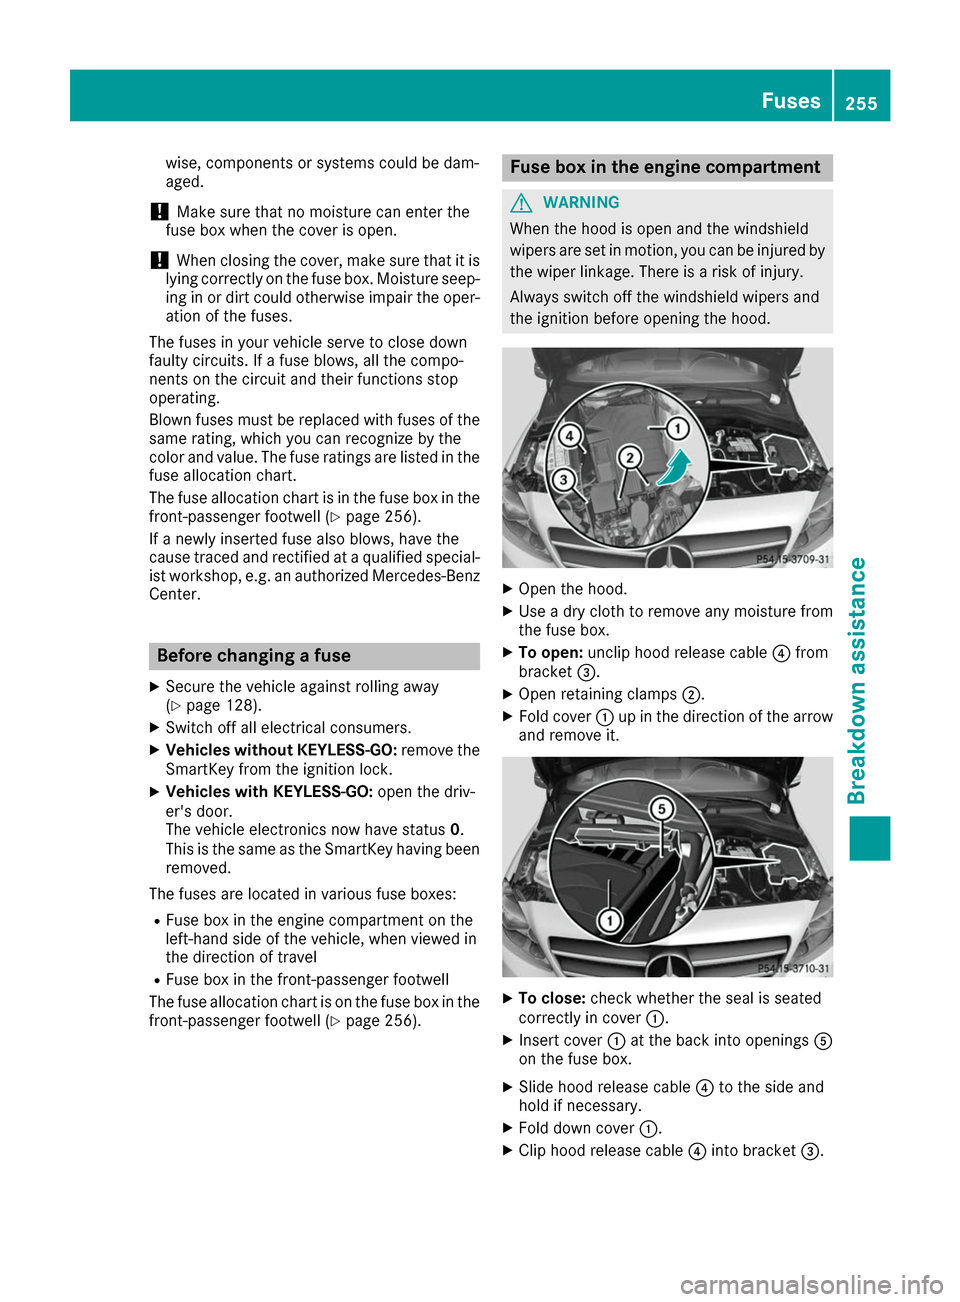 MERCEDES-BENZ B-Class 2017 W246 Service Manual wise, components or systems could be dam-
aged.
! Make sure that no moisture can enter the
fuse box when the cover is open.
! When closing the cover, make sure that it is
lying correctly on the fuse b